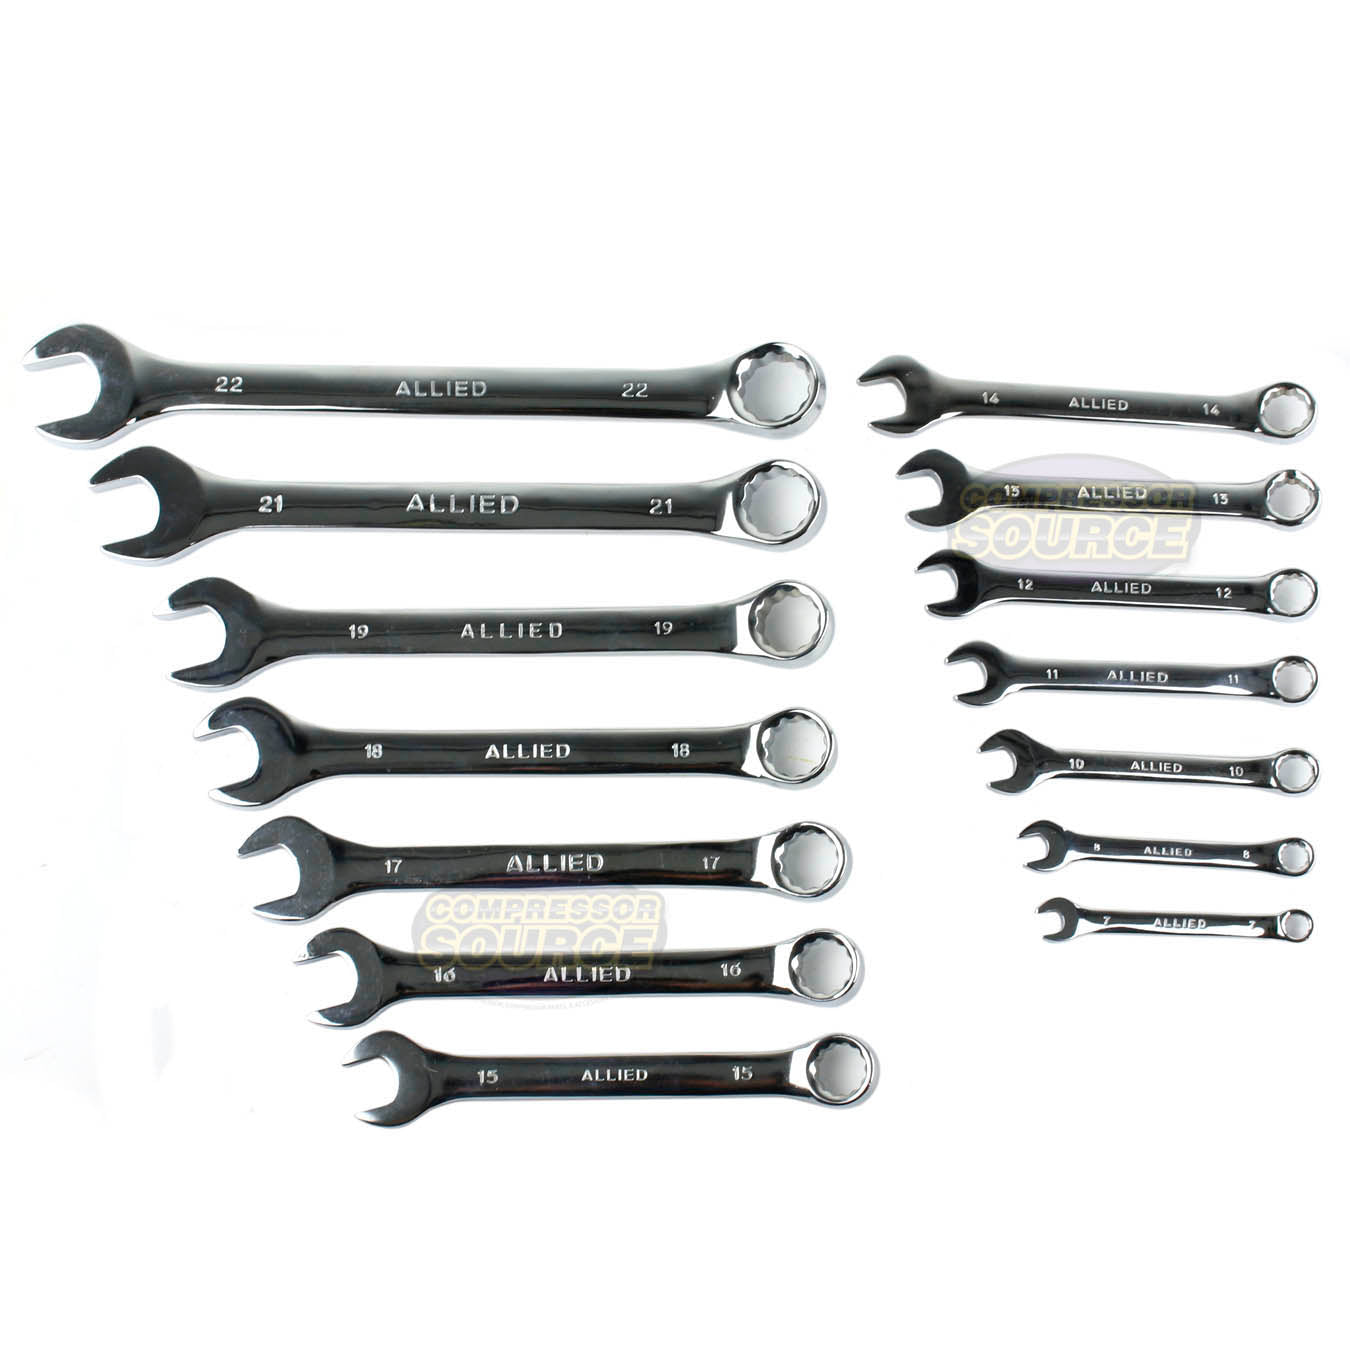 Allied Tools 14 Piece Combination Wrench Set 7-22mm with Roll up Storage Metric